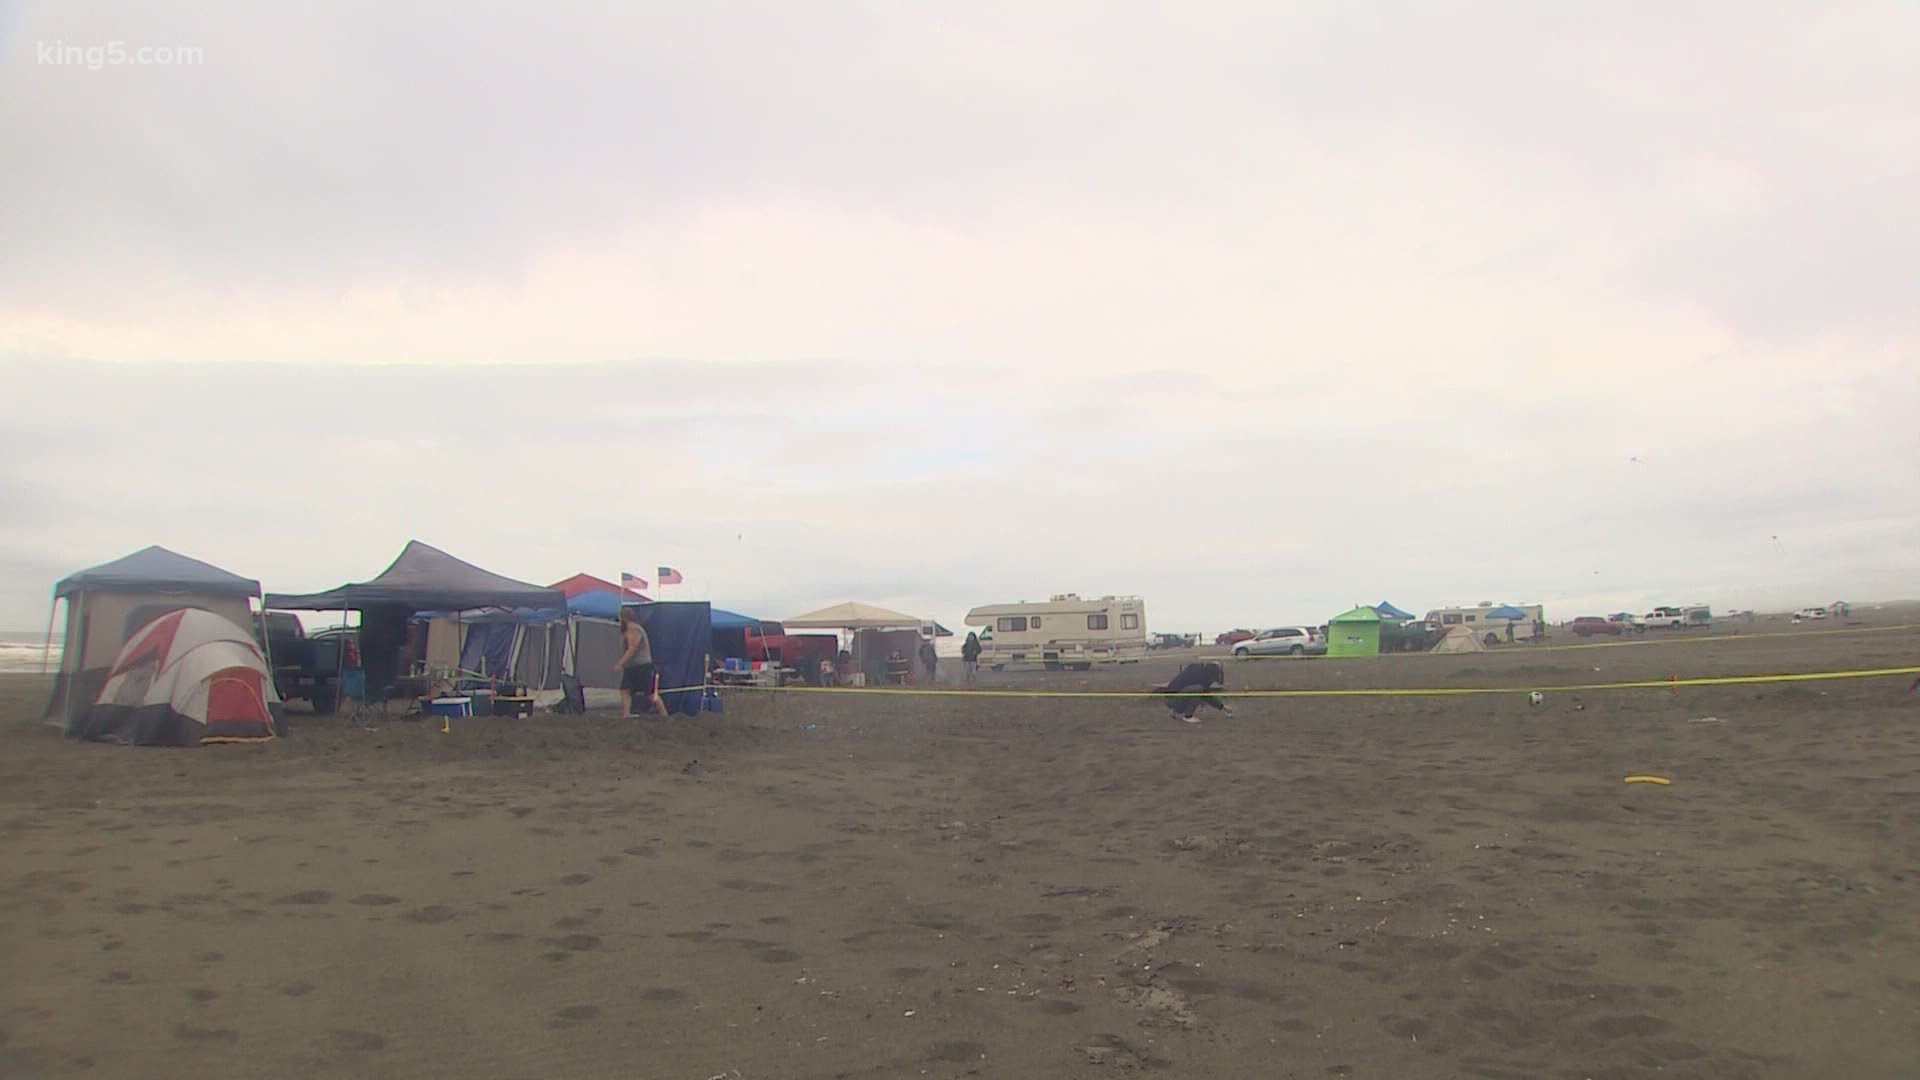 The county, which sees thousands of tourists each summer, is seeing a spike in cases this month after thousands of visitors hit the beaches.